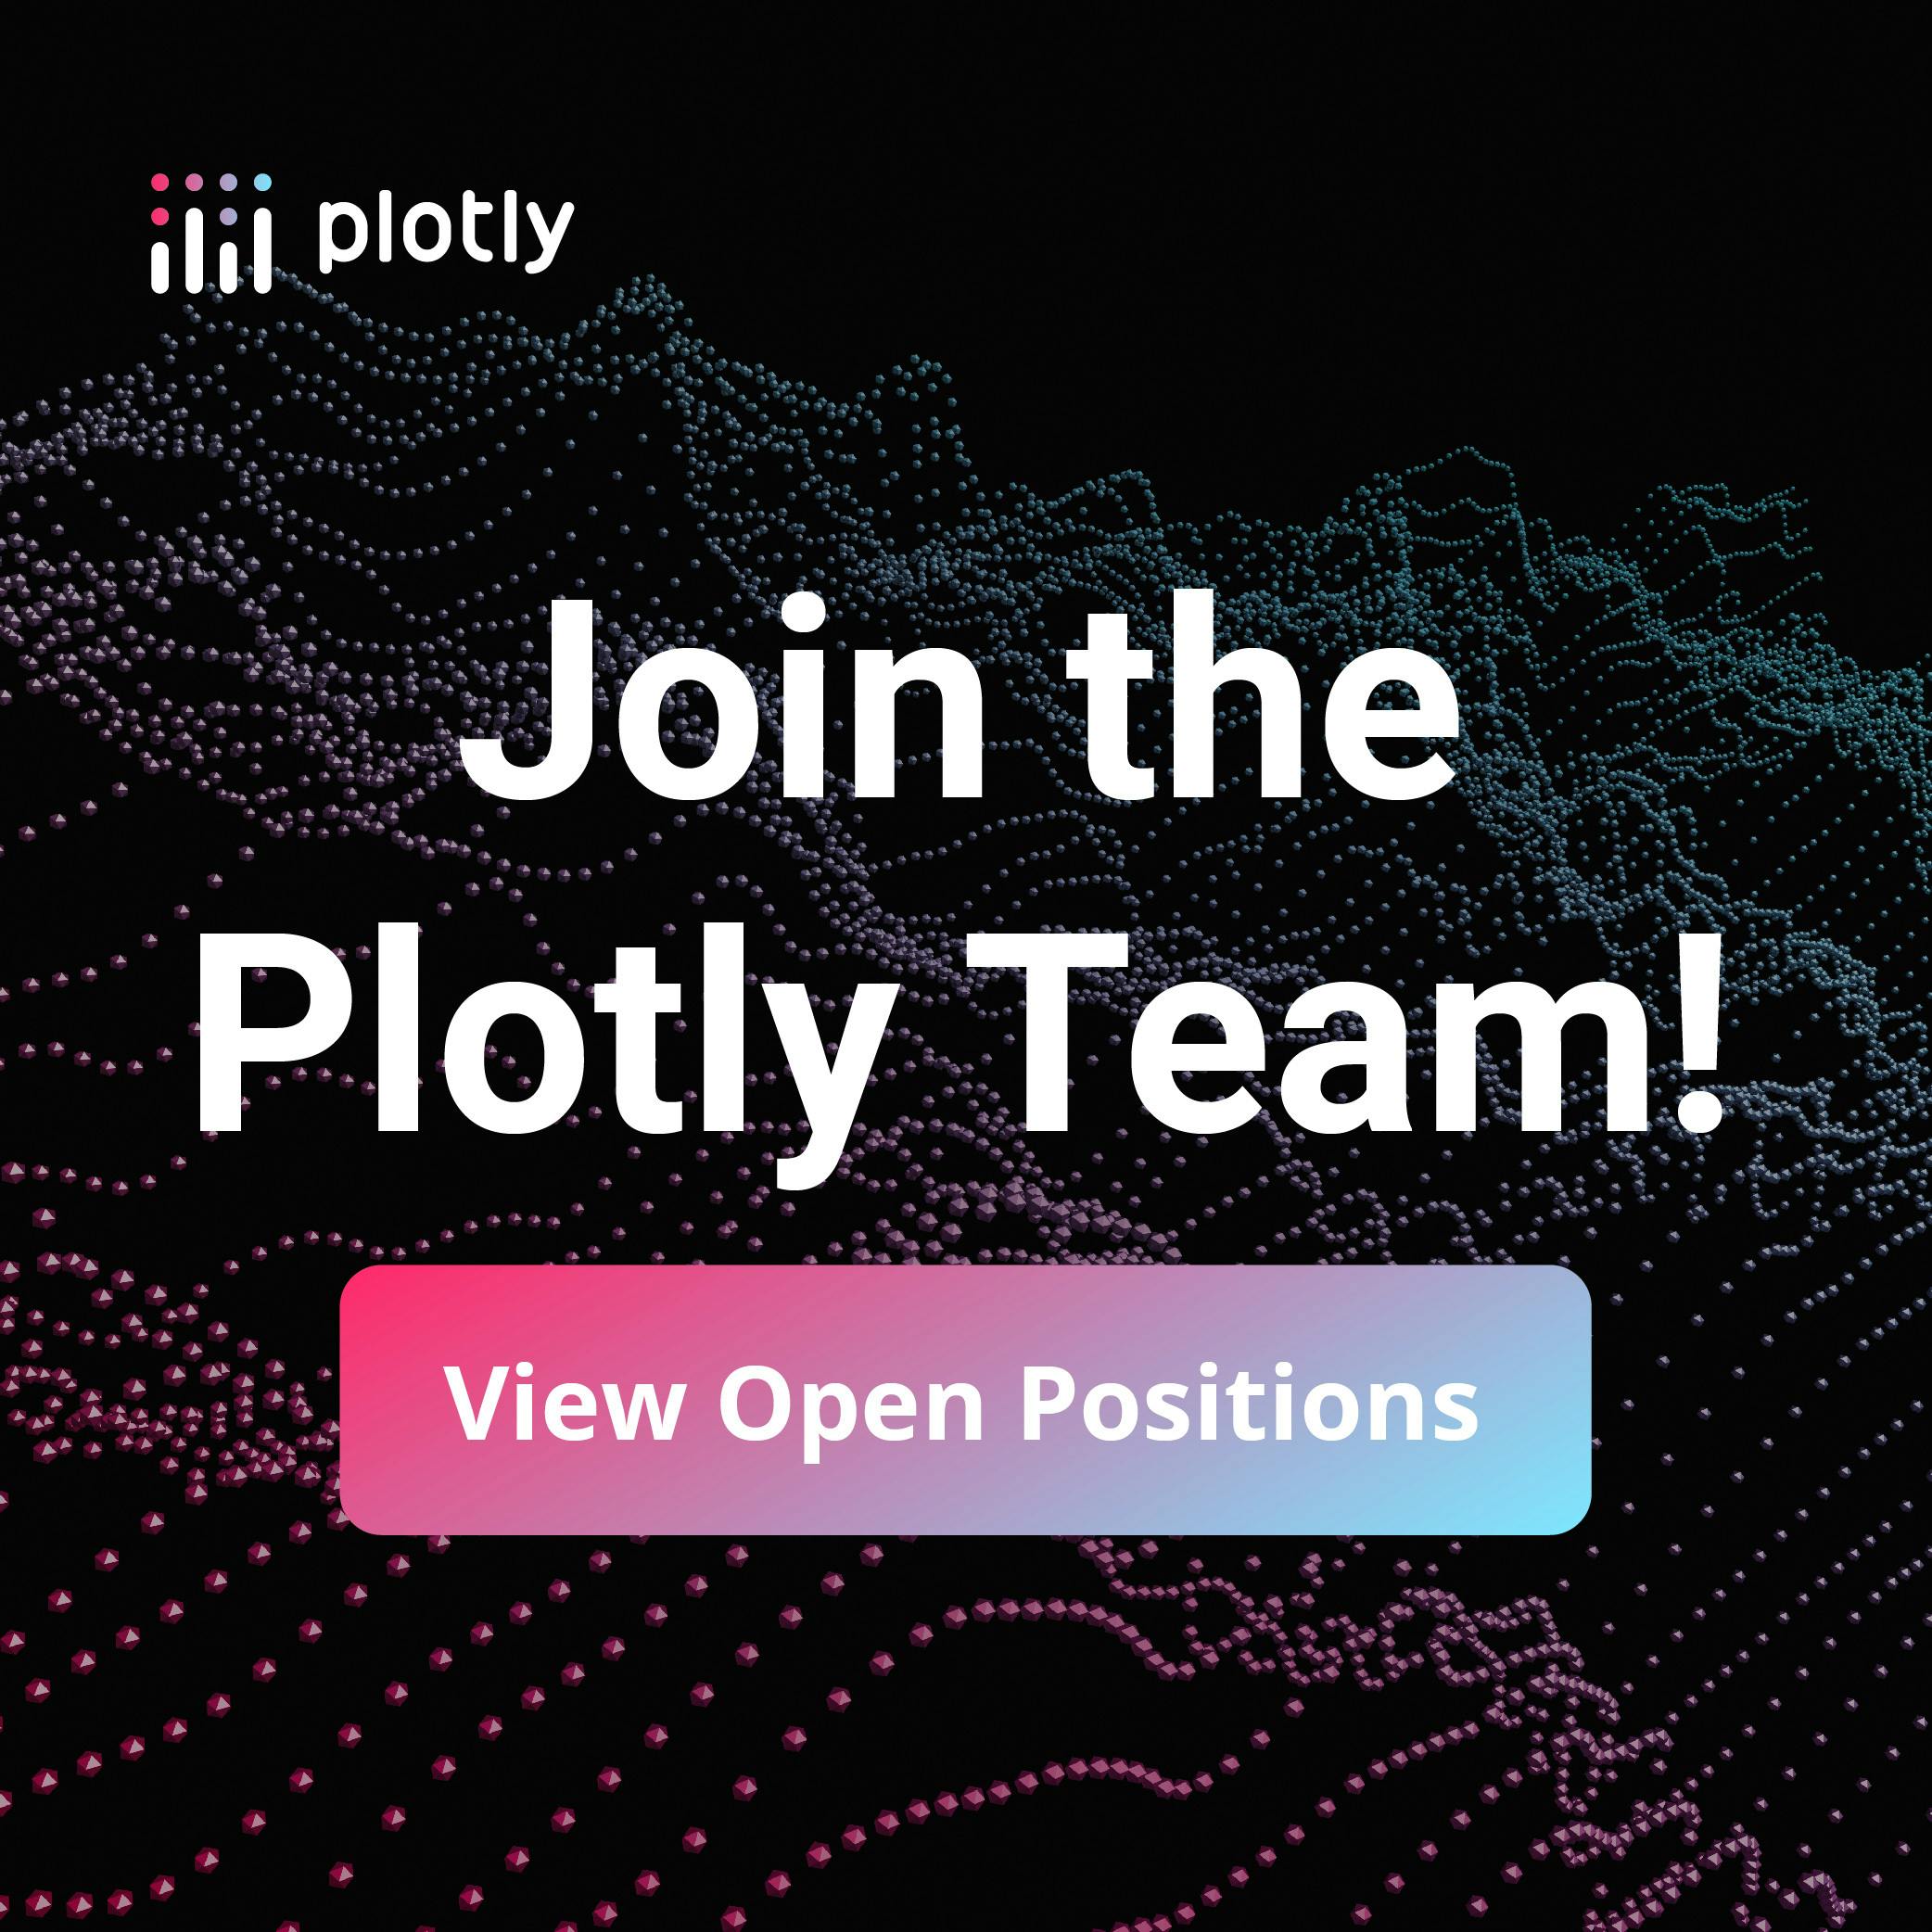 View all the positions that Plotly is hiring for!